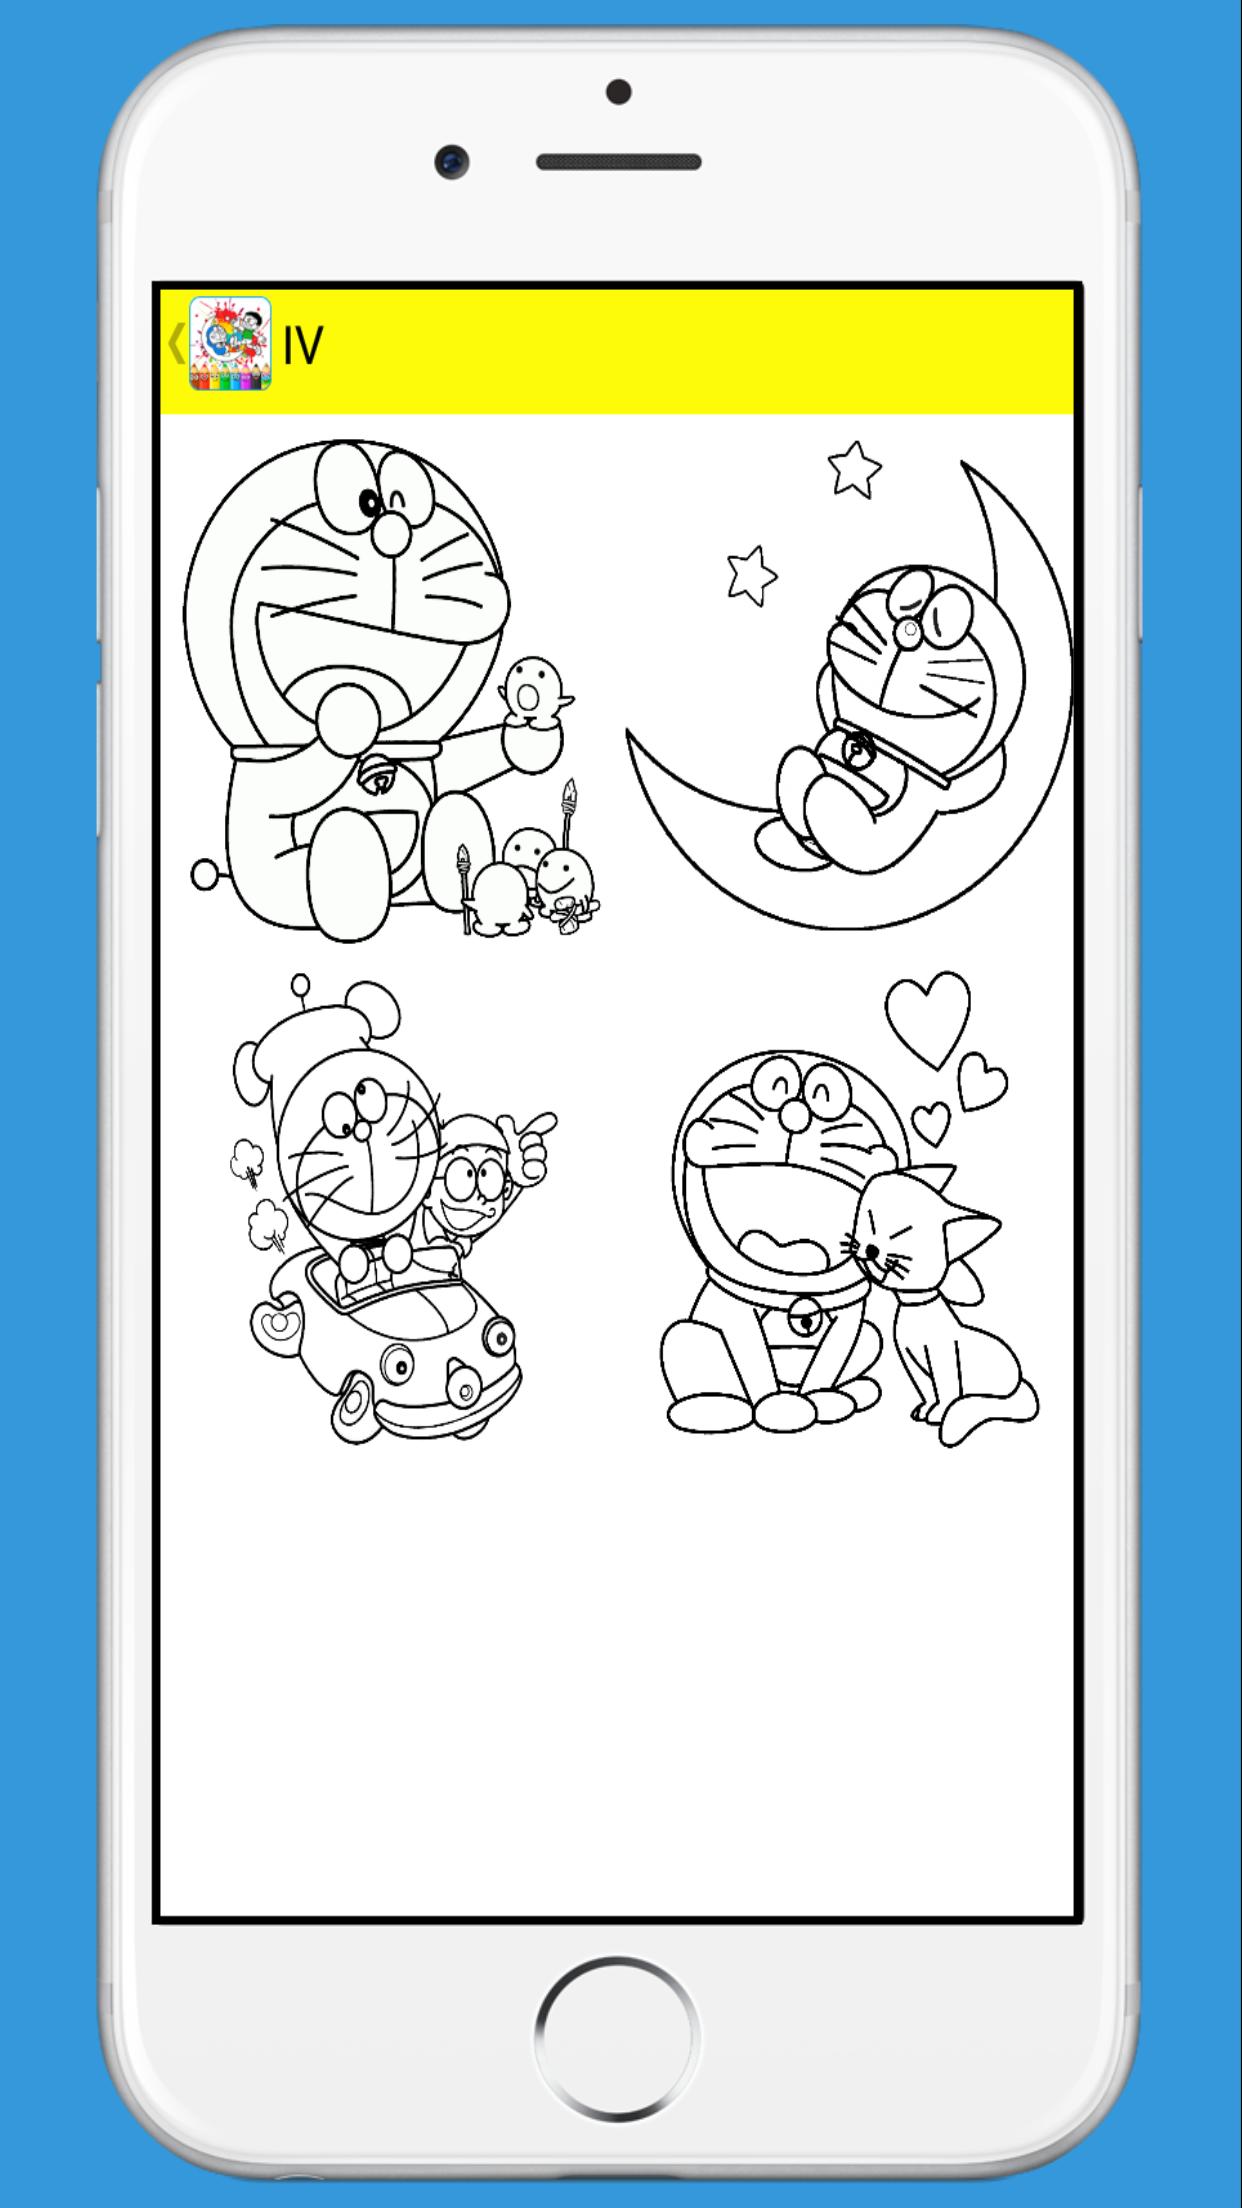 Doraemon Coloring Page For Kids For Android Apk Download